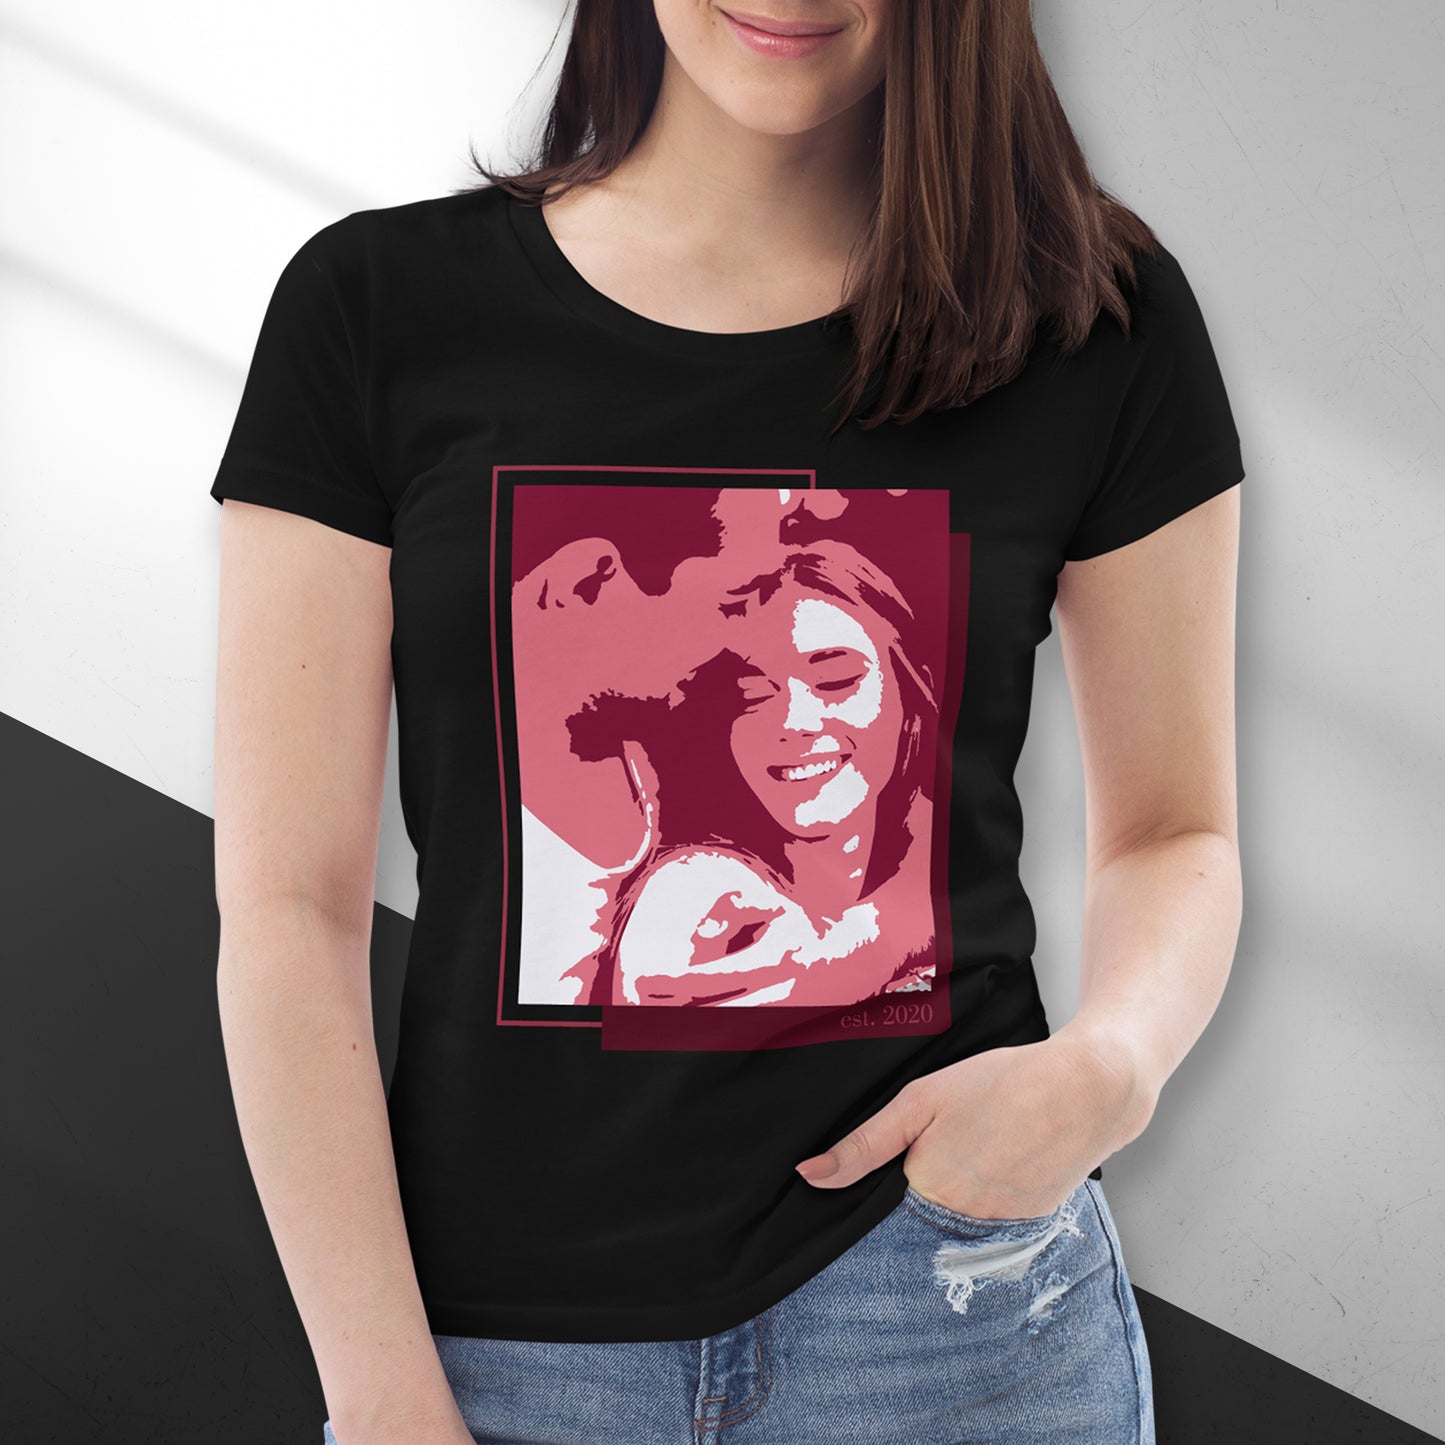 Personalized Women's T-Shirt - Large Portrait in Red | Seepu